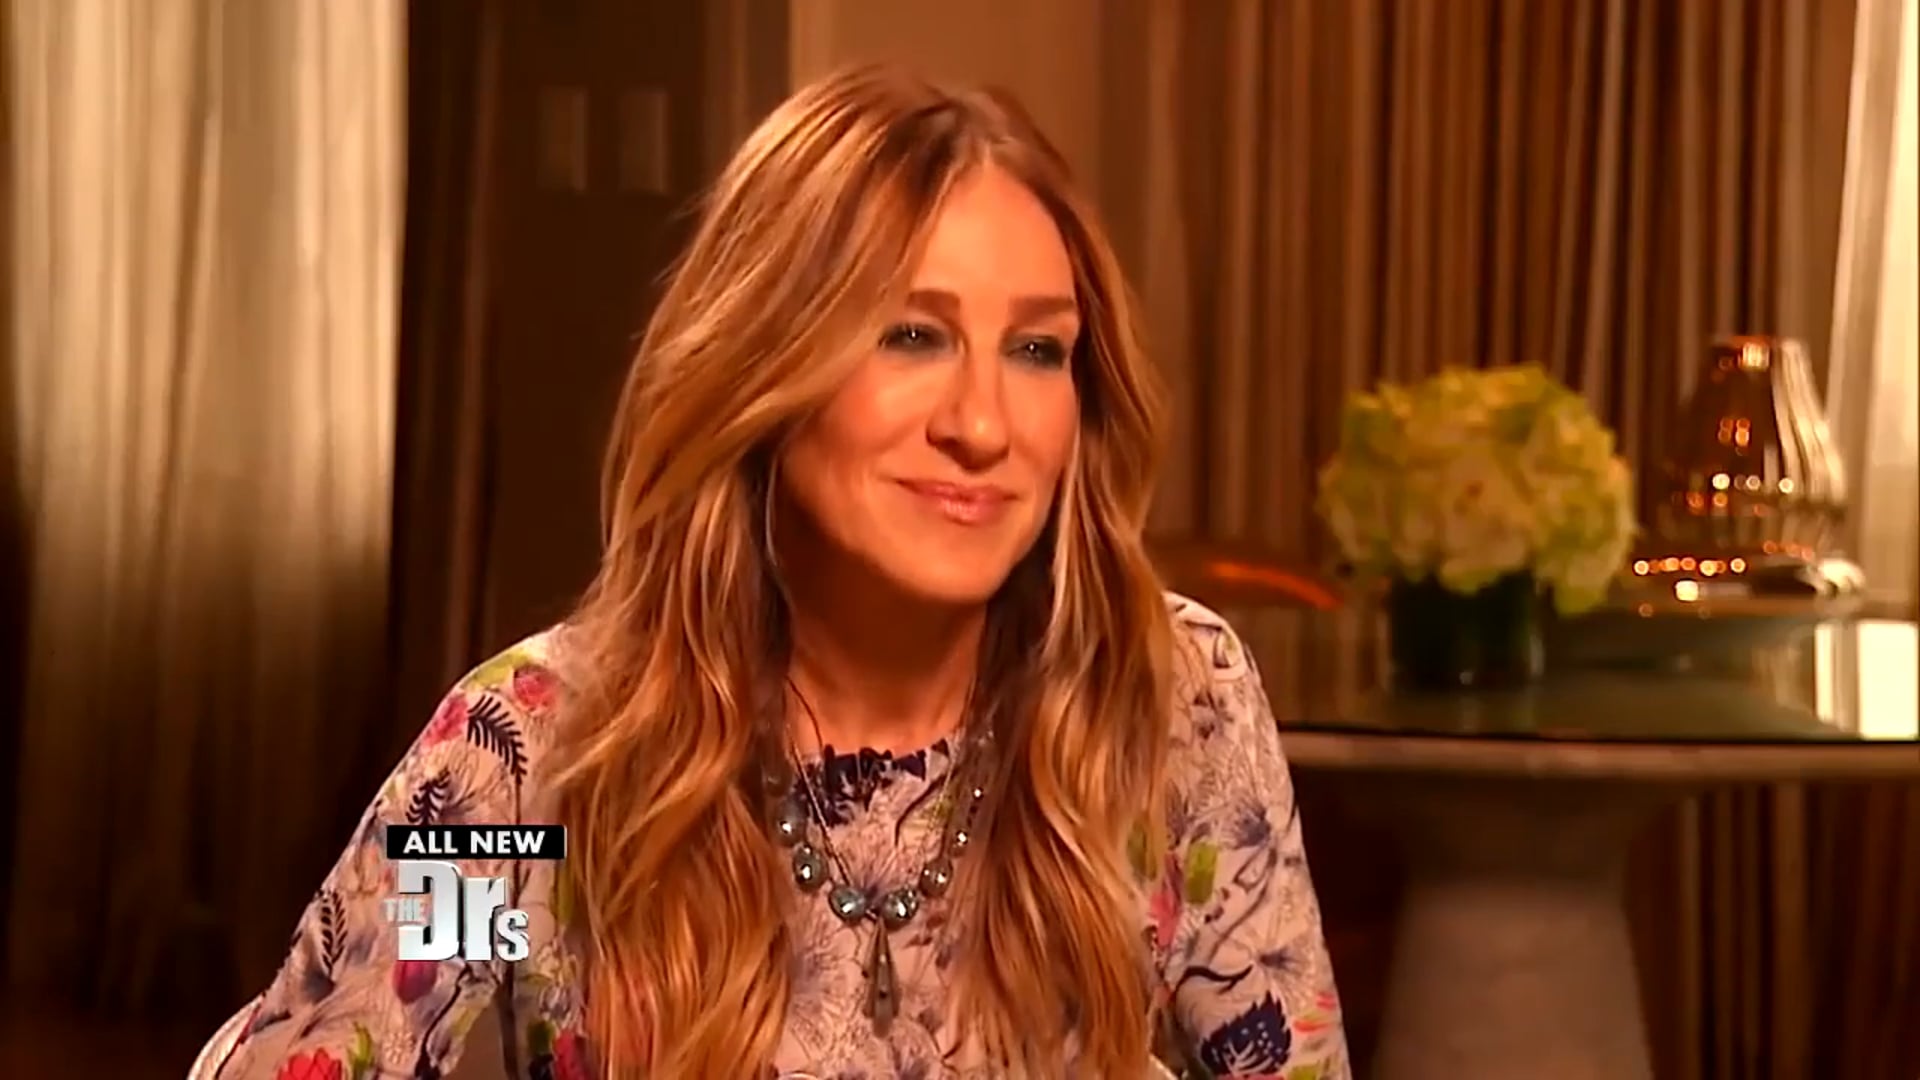 Sarah Jessica Parker Shares about Her Son’s Life-Threatening Allergy